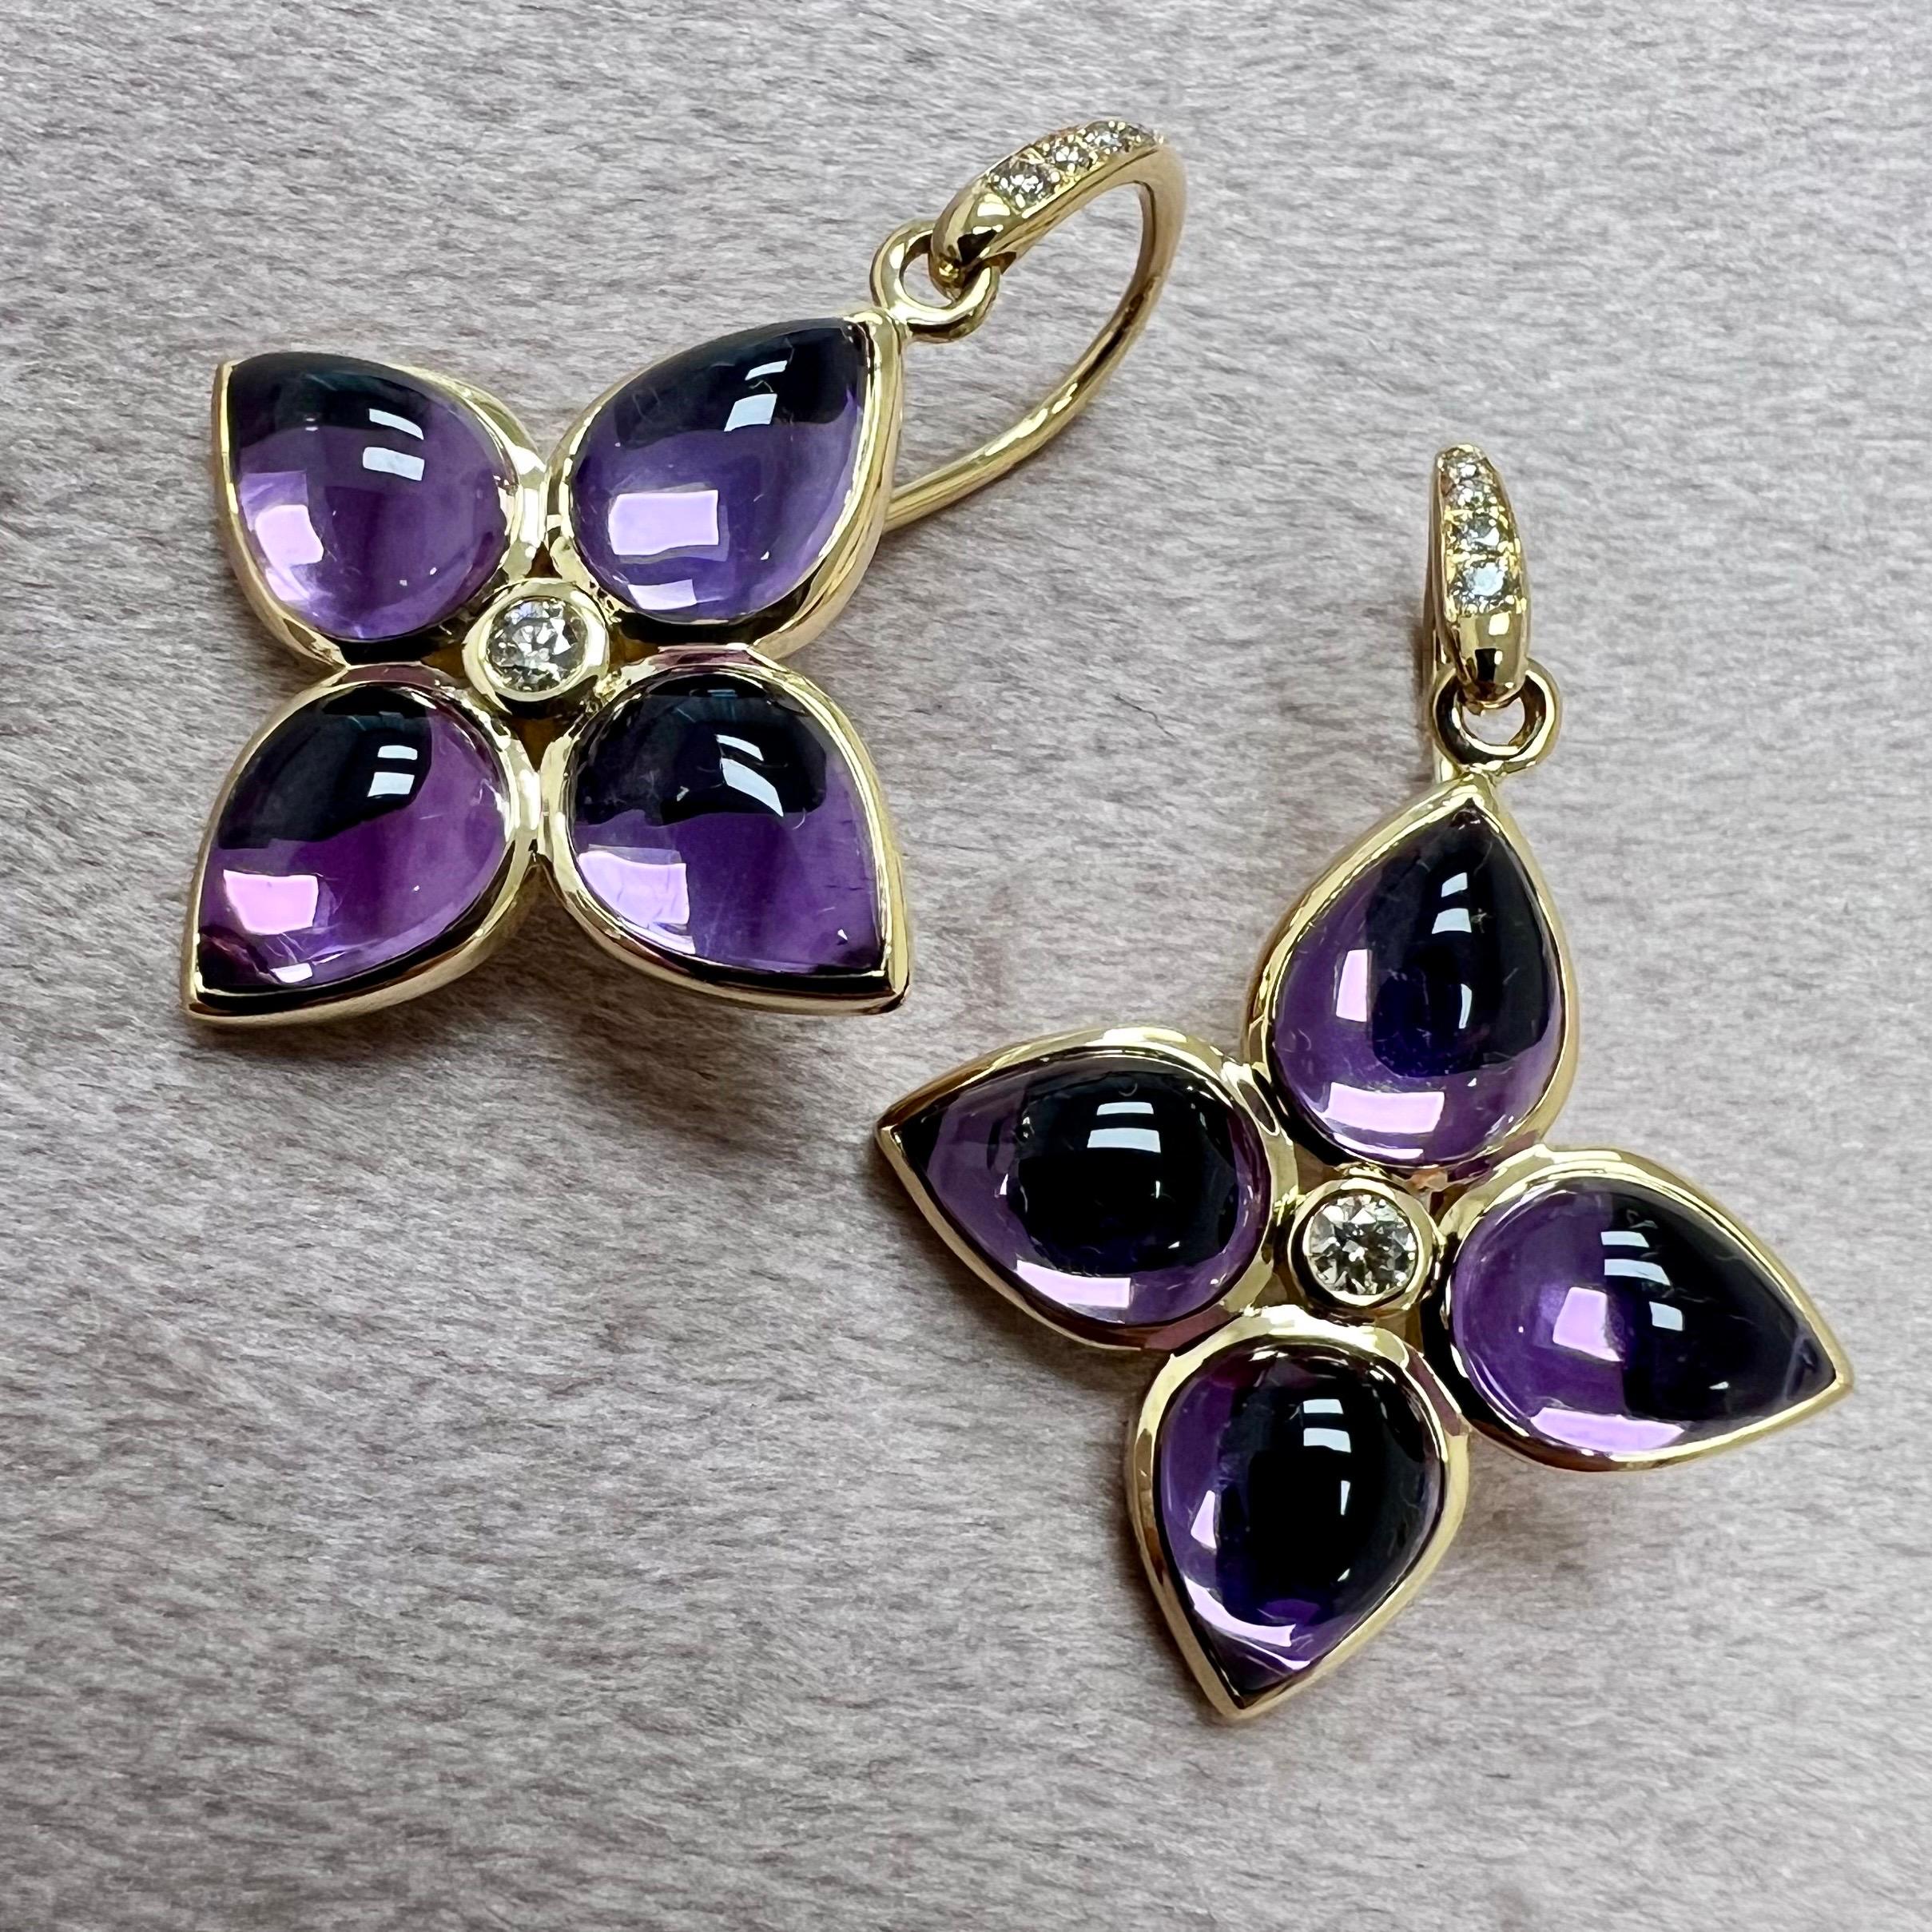 Created in 18 karat yellow gold
Amethyst 9.50 carats approx.
Diamonds 0.14 carat approx.
French wire for pierced ears
Limited Edition


About the Designers

Drawing inspiration from little things, Dharmesh & Namrata Kothari have created an